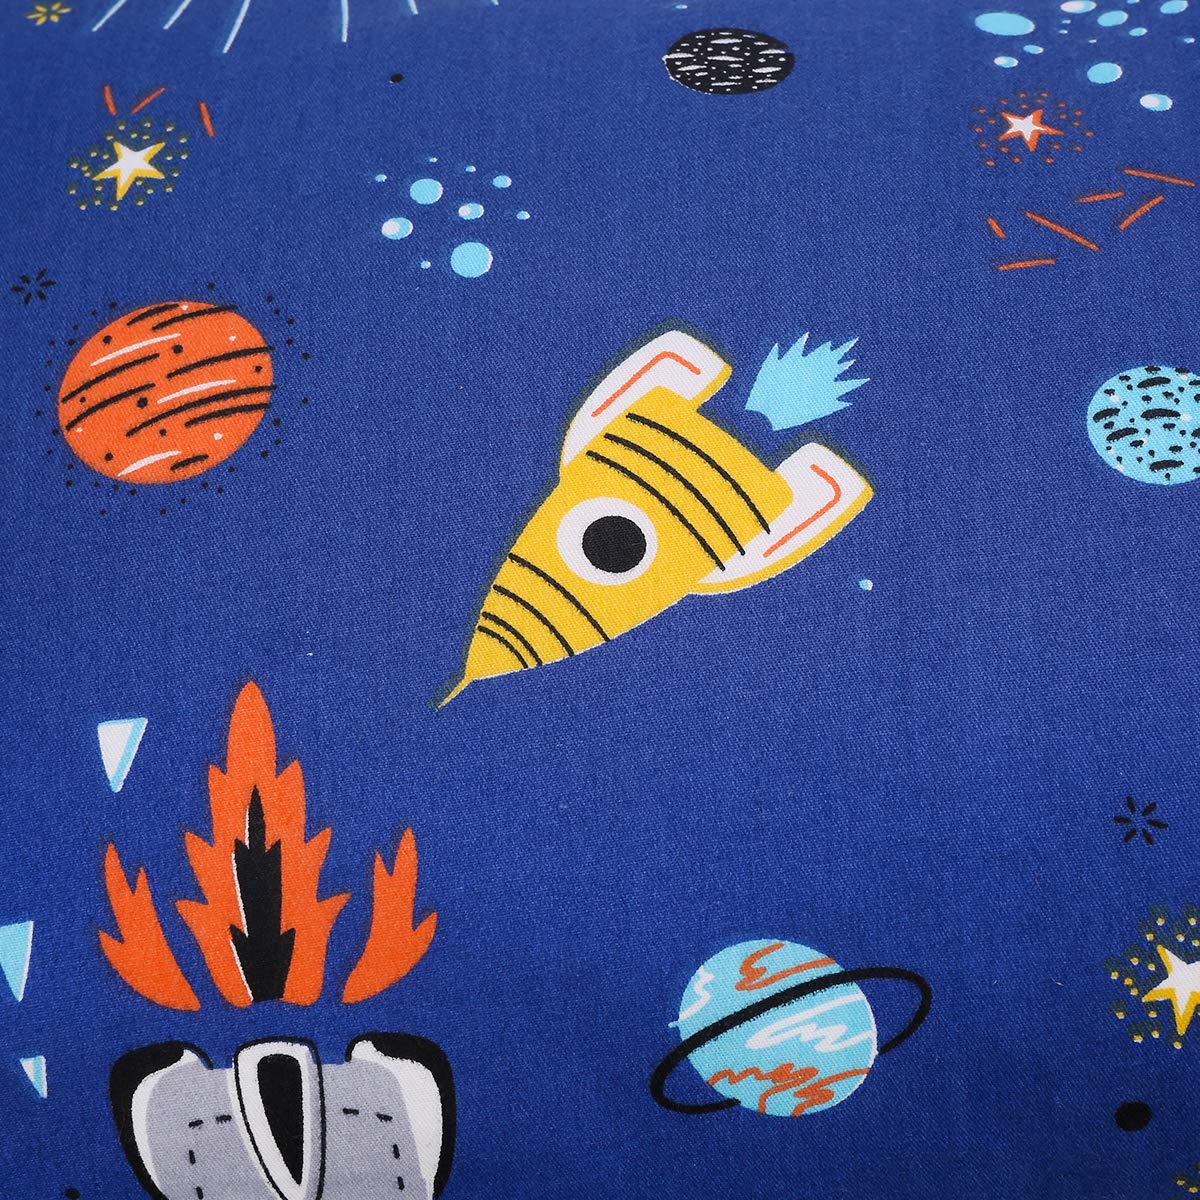 Astronaut Space Galaxy Baby Crib Sheet - Fitted Toddler Sheet Polyester Baby Sheet for Standard Crib and Toddler mattresses Nursery Bedding Sheet Crib Mattress Sheets for Boys 1 Pack - by UOMNY